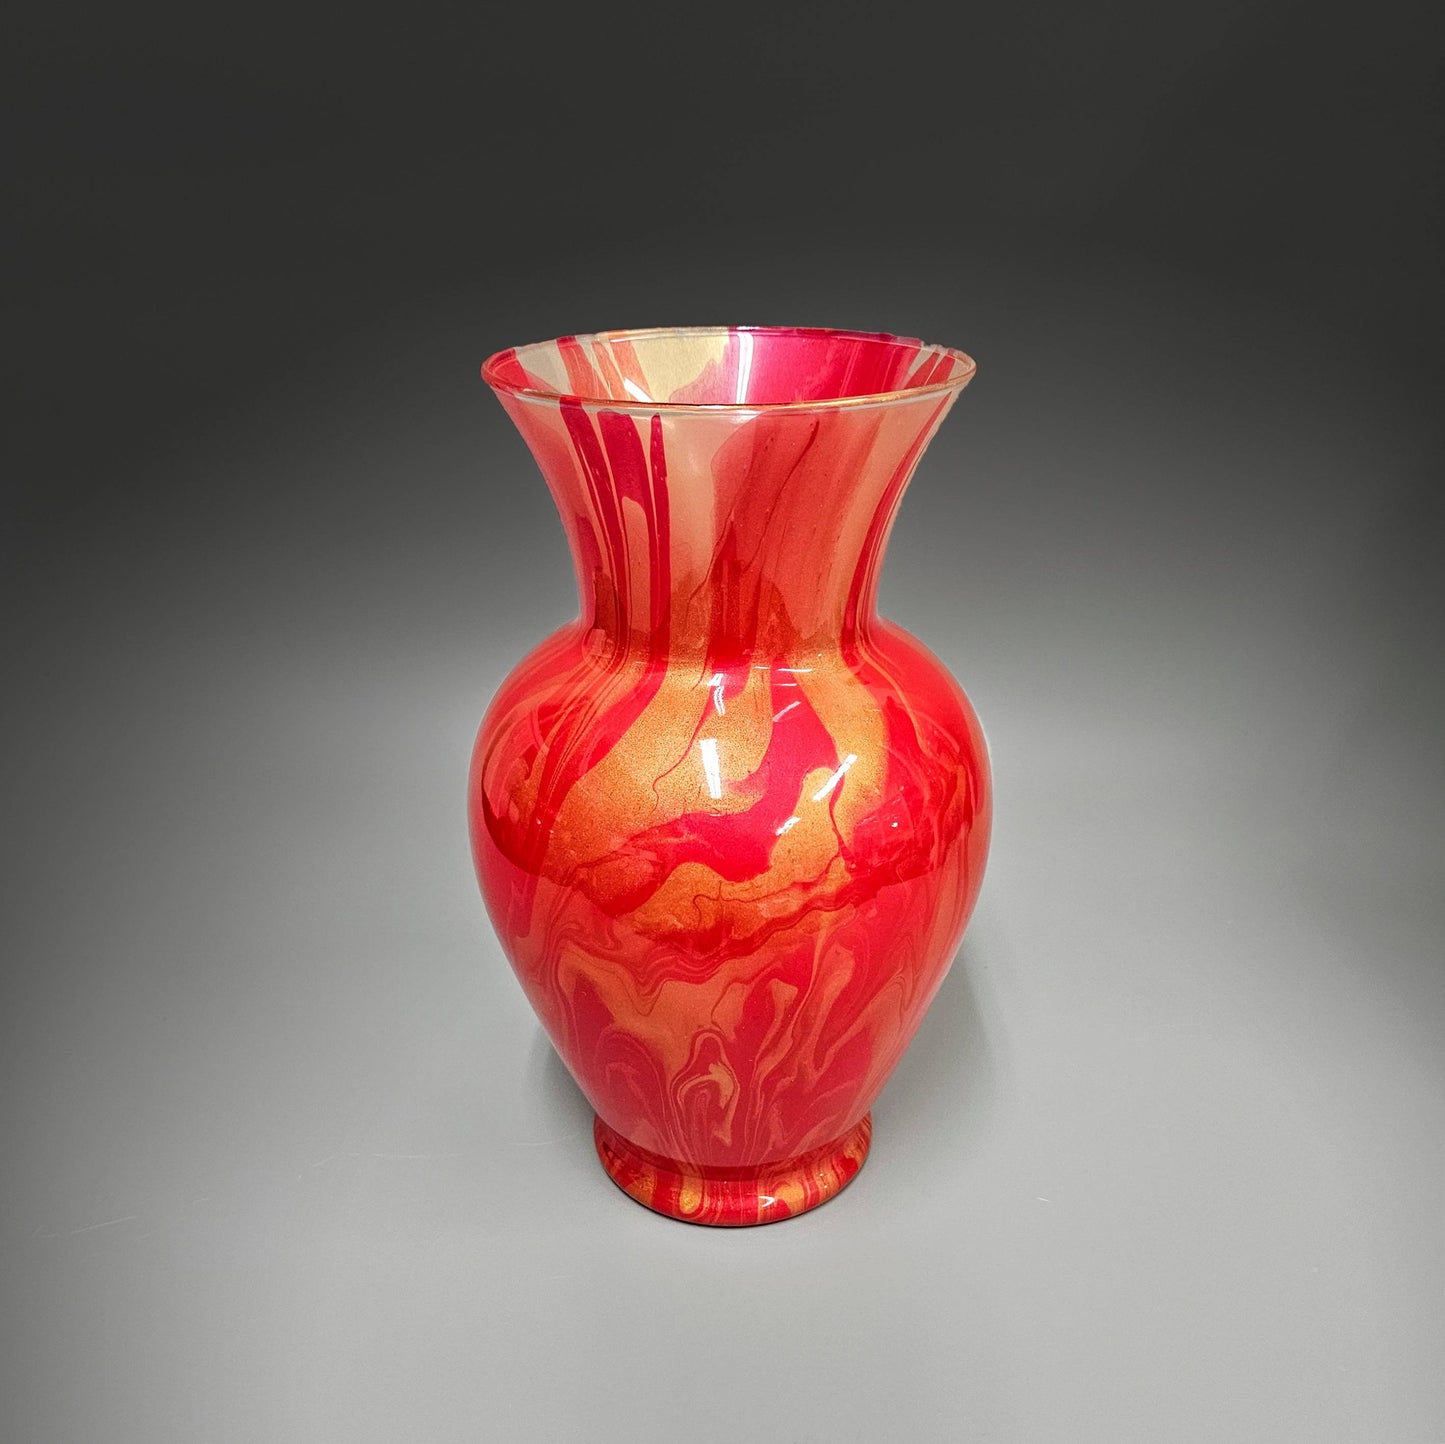 Red and Gold Centerpiece Vase | Handcrafted Fluid Art Décor Gifts